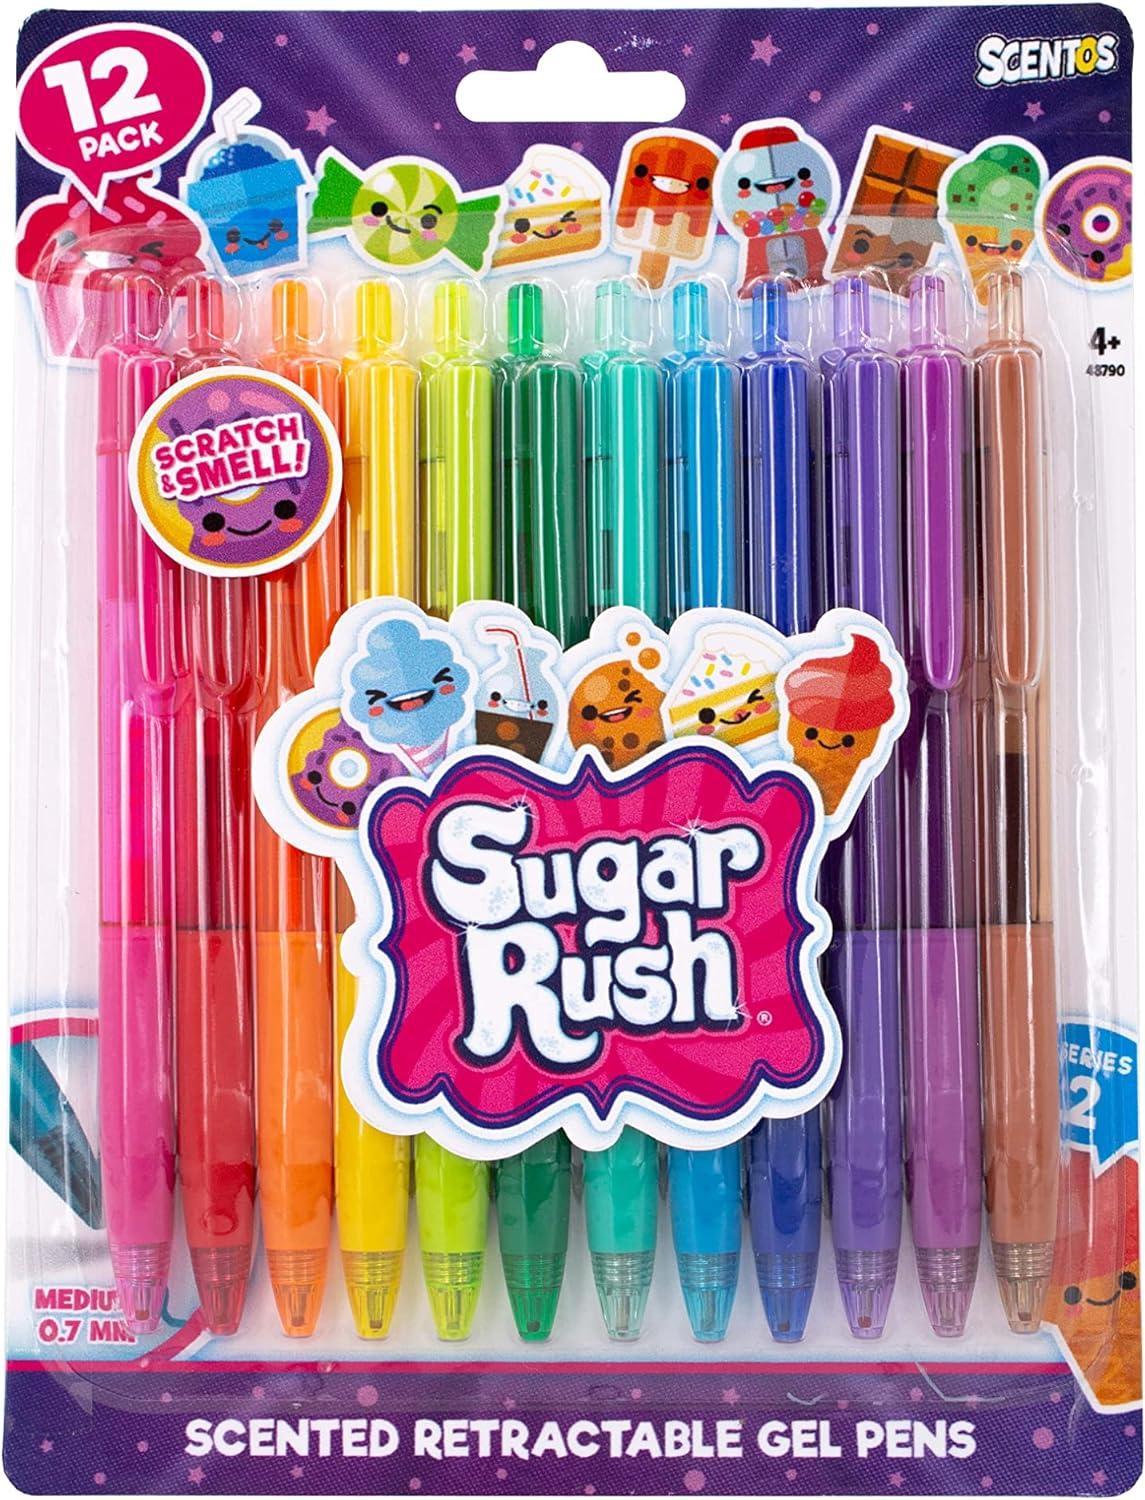 scentos sugar rush colored gel pens for kids - candy scented pens - medium point gel pens for coloring - for